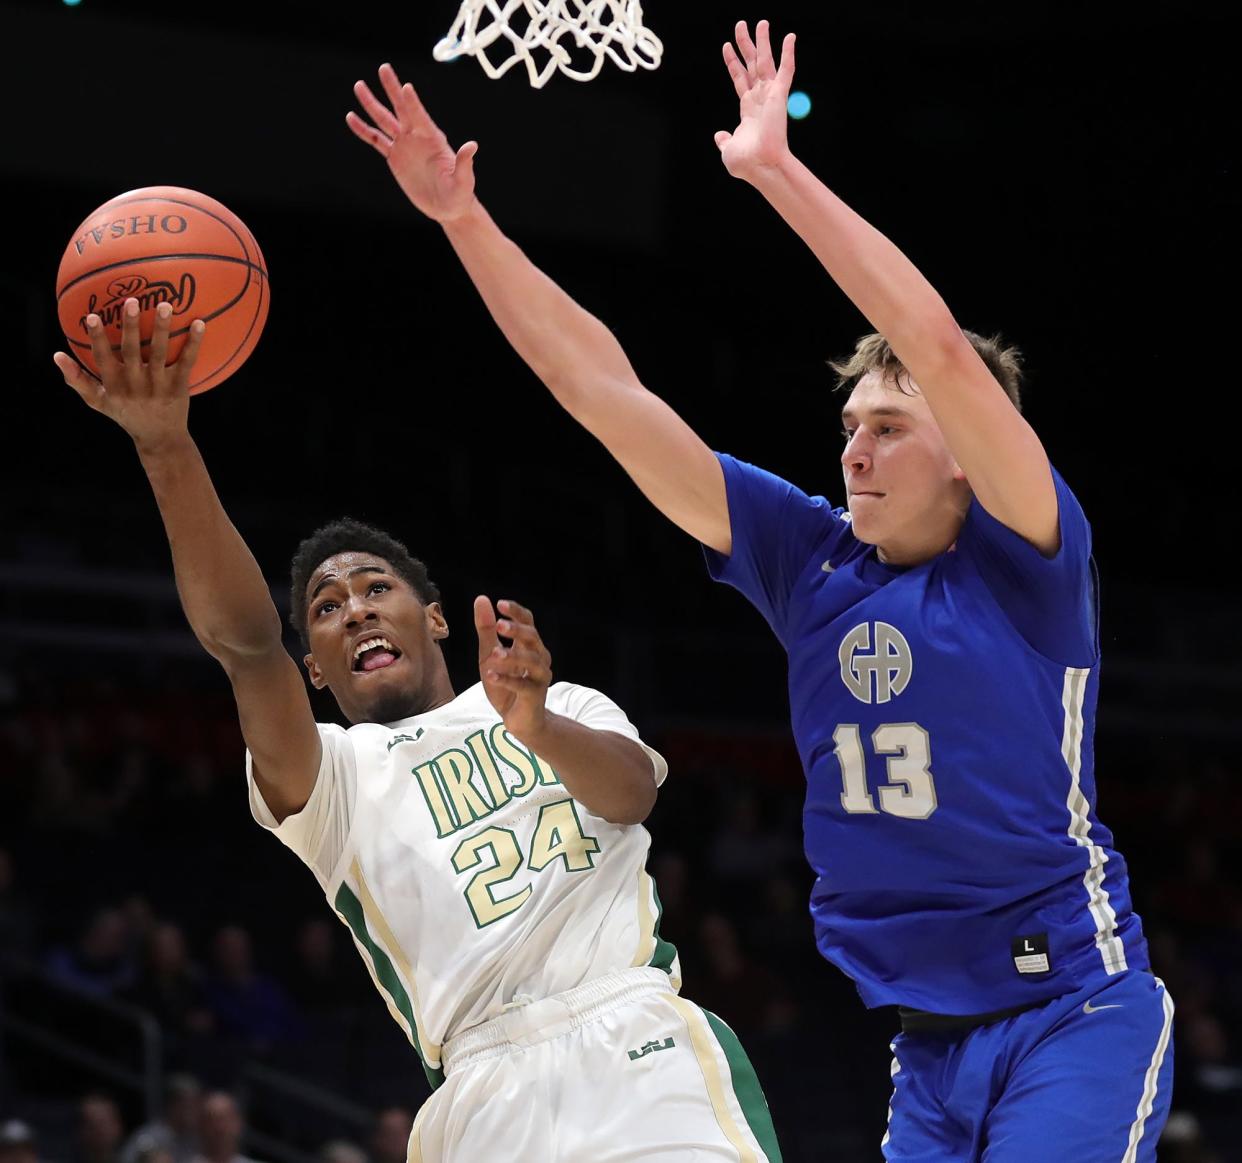 STVM guard Sencire Harris, left, makes a layup under Gilmour Academy guard Braeden Bakos during the second half of the OHSAA Division II state championship at UD Arena on Sunday.